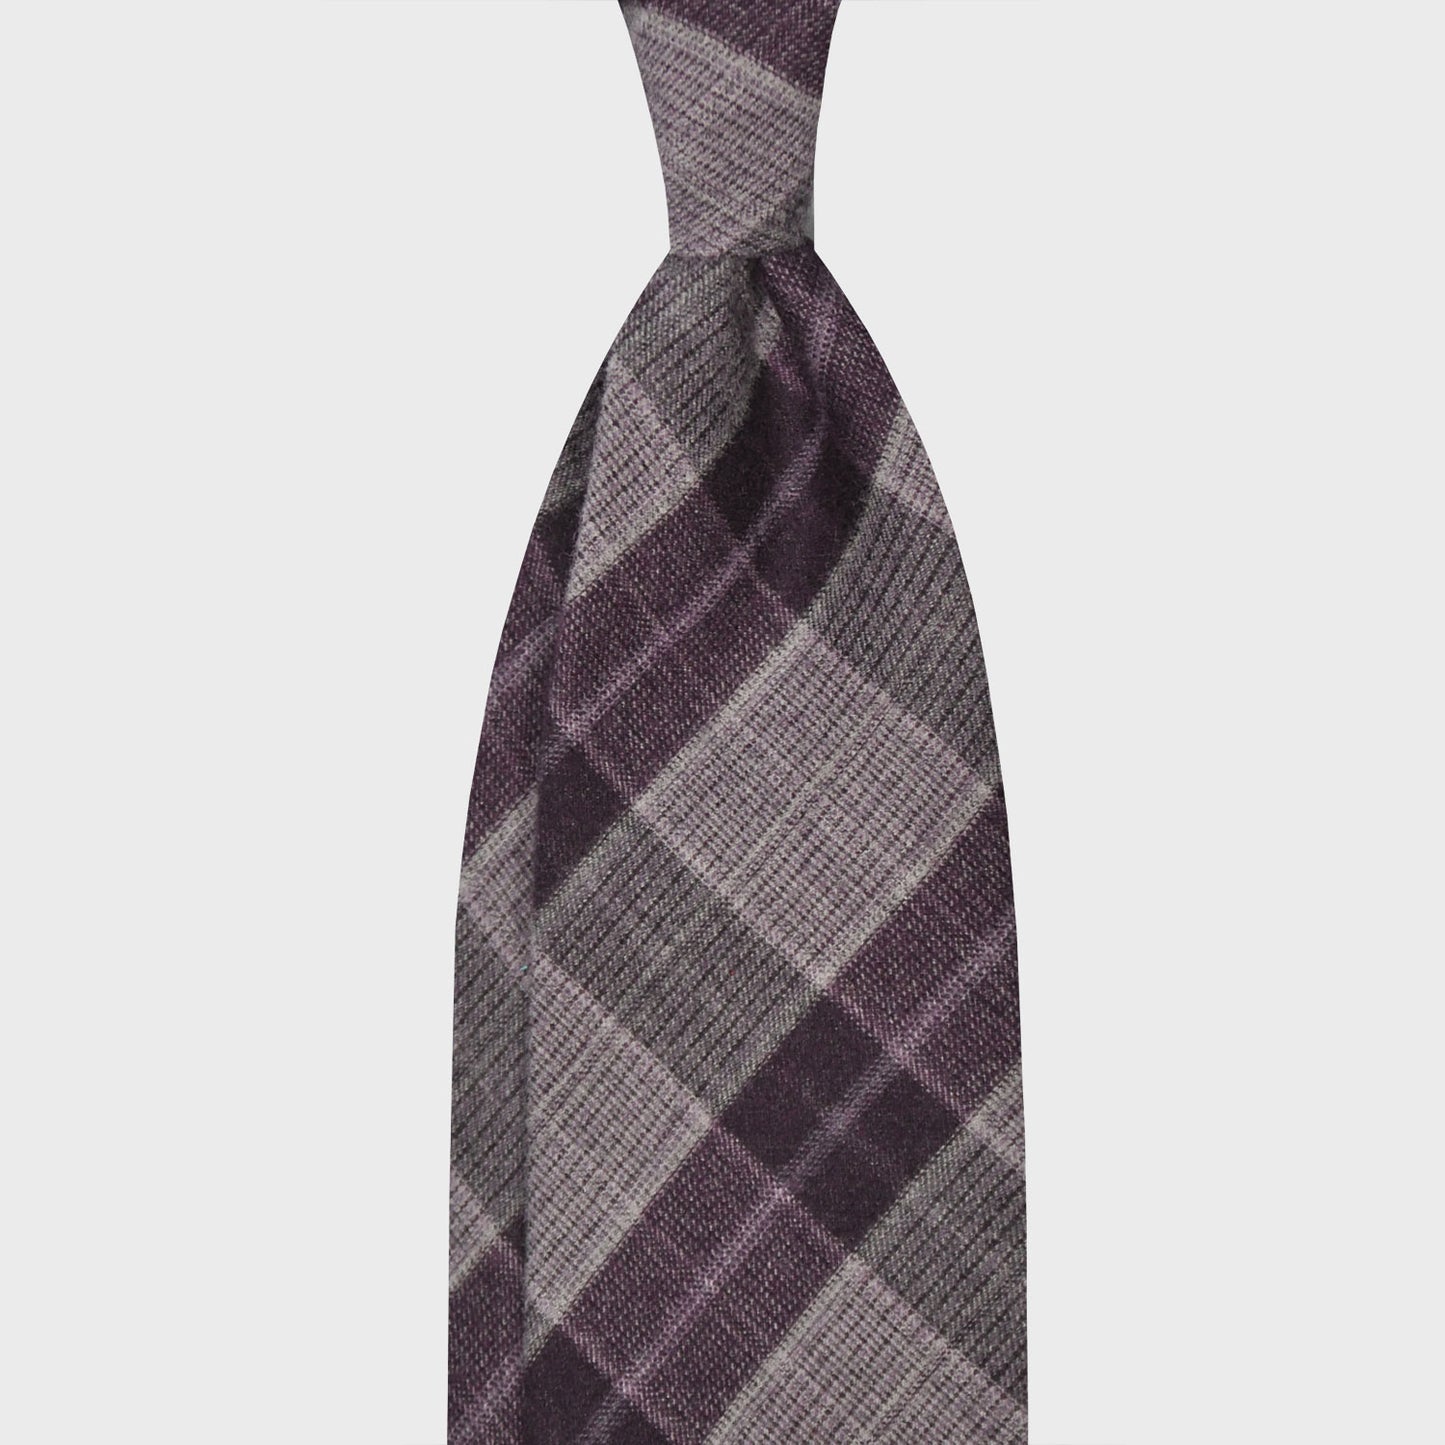 Purple Checks Light Gauze Wool Tie 3 Folds Unlined F.Marino. Light gauze merino wool tie, handmade F.Marino for Wools Boutique Uomo, hand rolled edge, purple and grey checks pattern, soft fabric to the touch, not bristly, ideal for a regular knot.